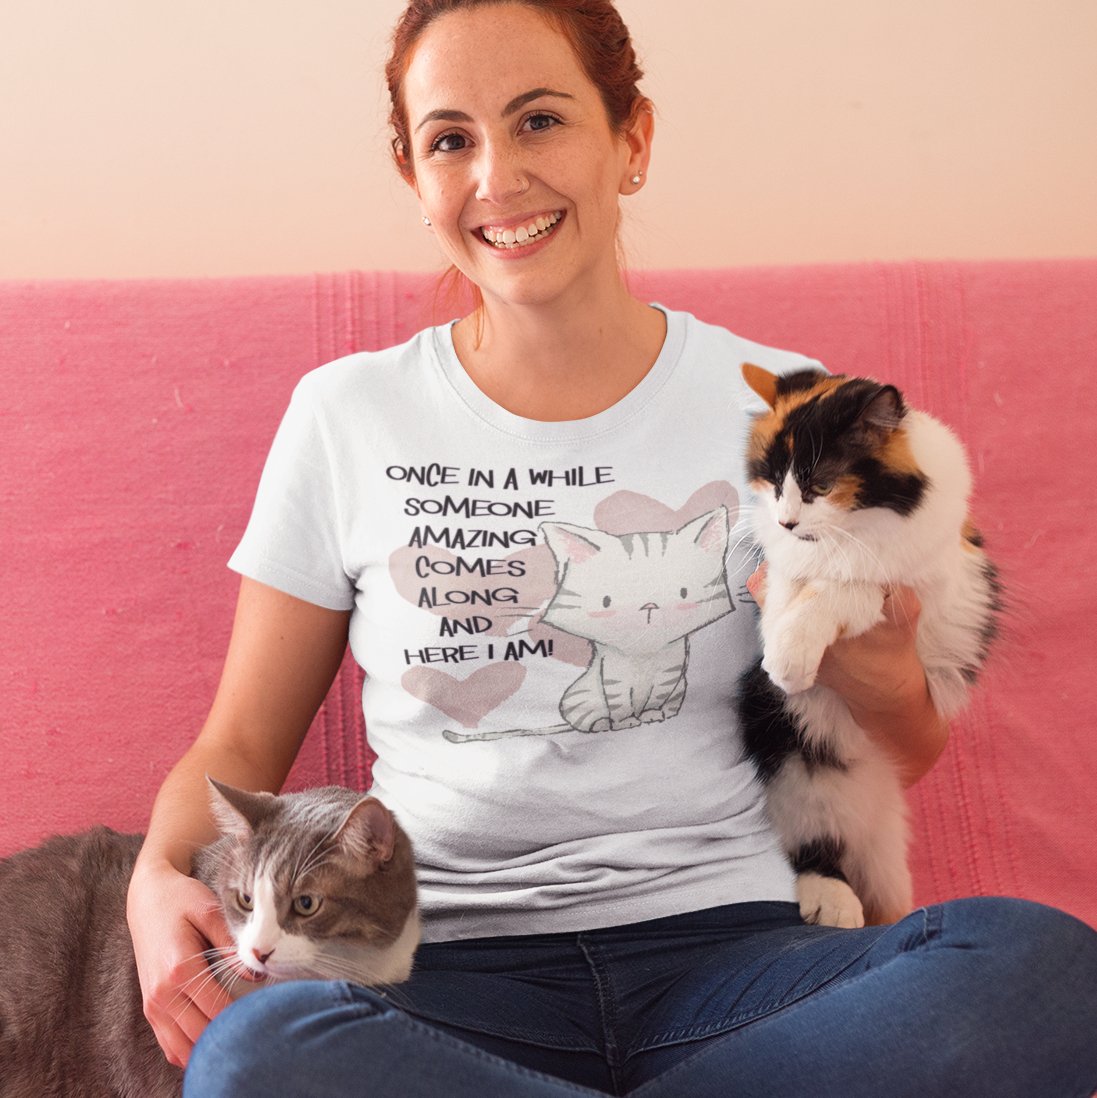 Once in a While Someone Amazing Comes Along, and Here I Am – Cat: Purrsonality-Infused T-shirt – Where Feline Charm Takes Center Stage!"